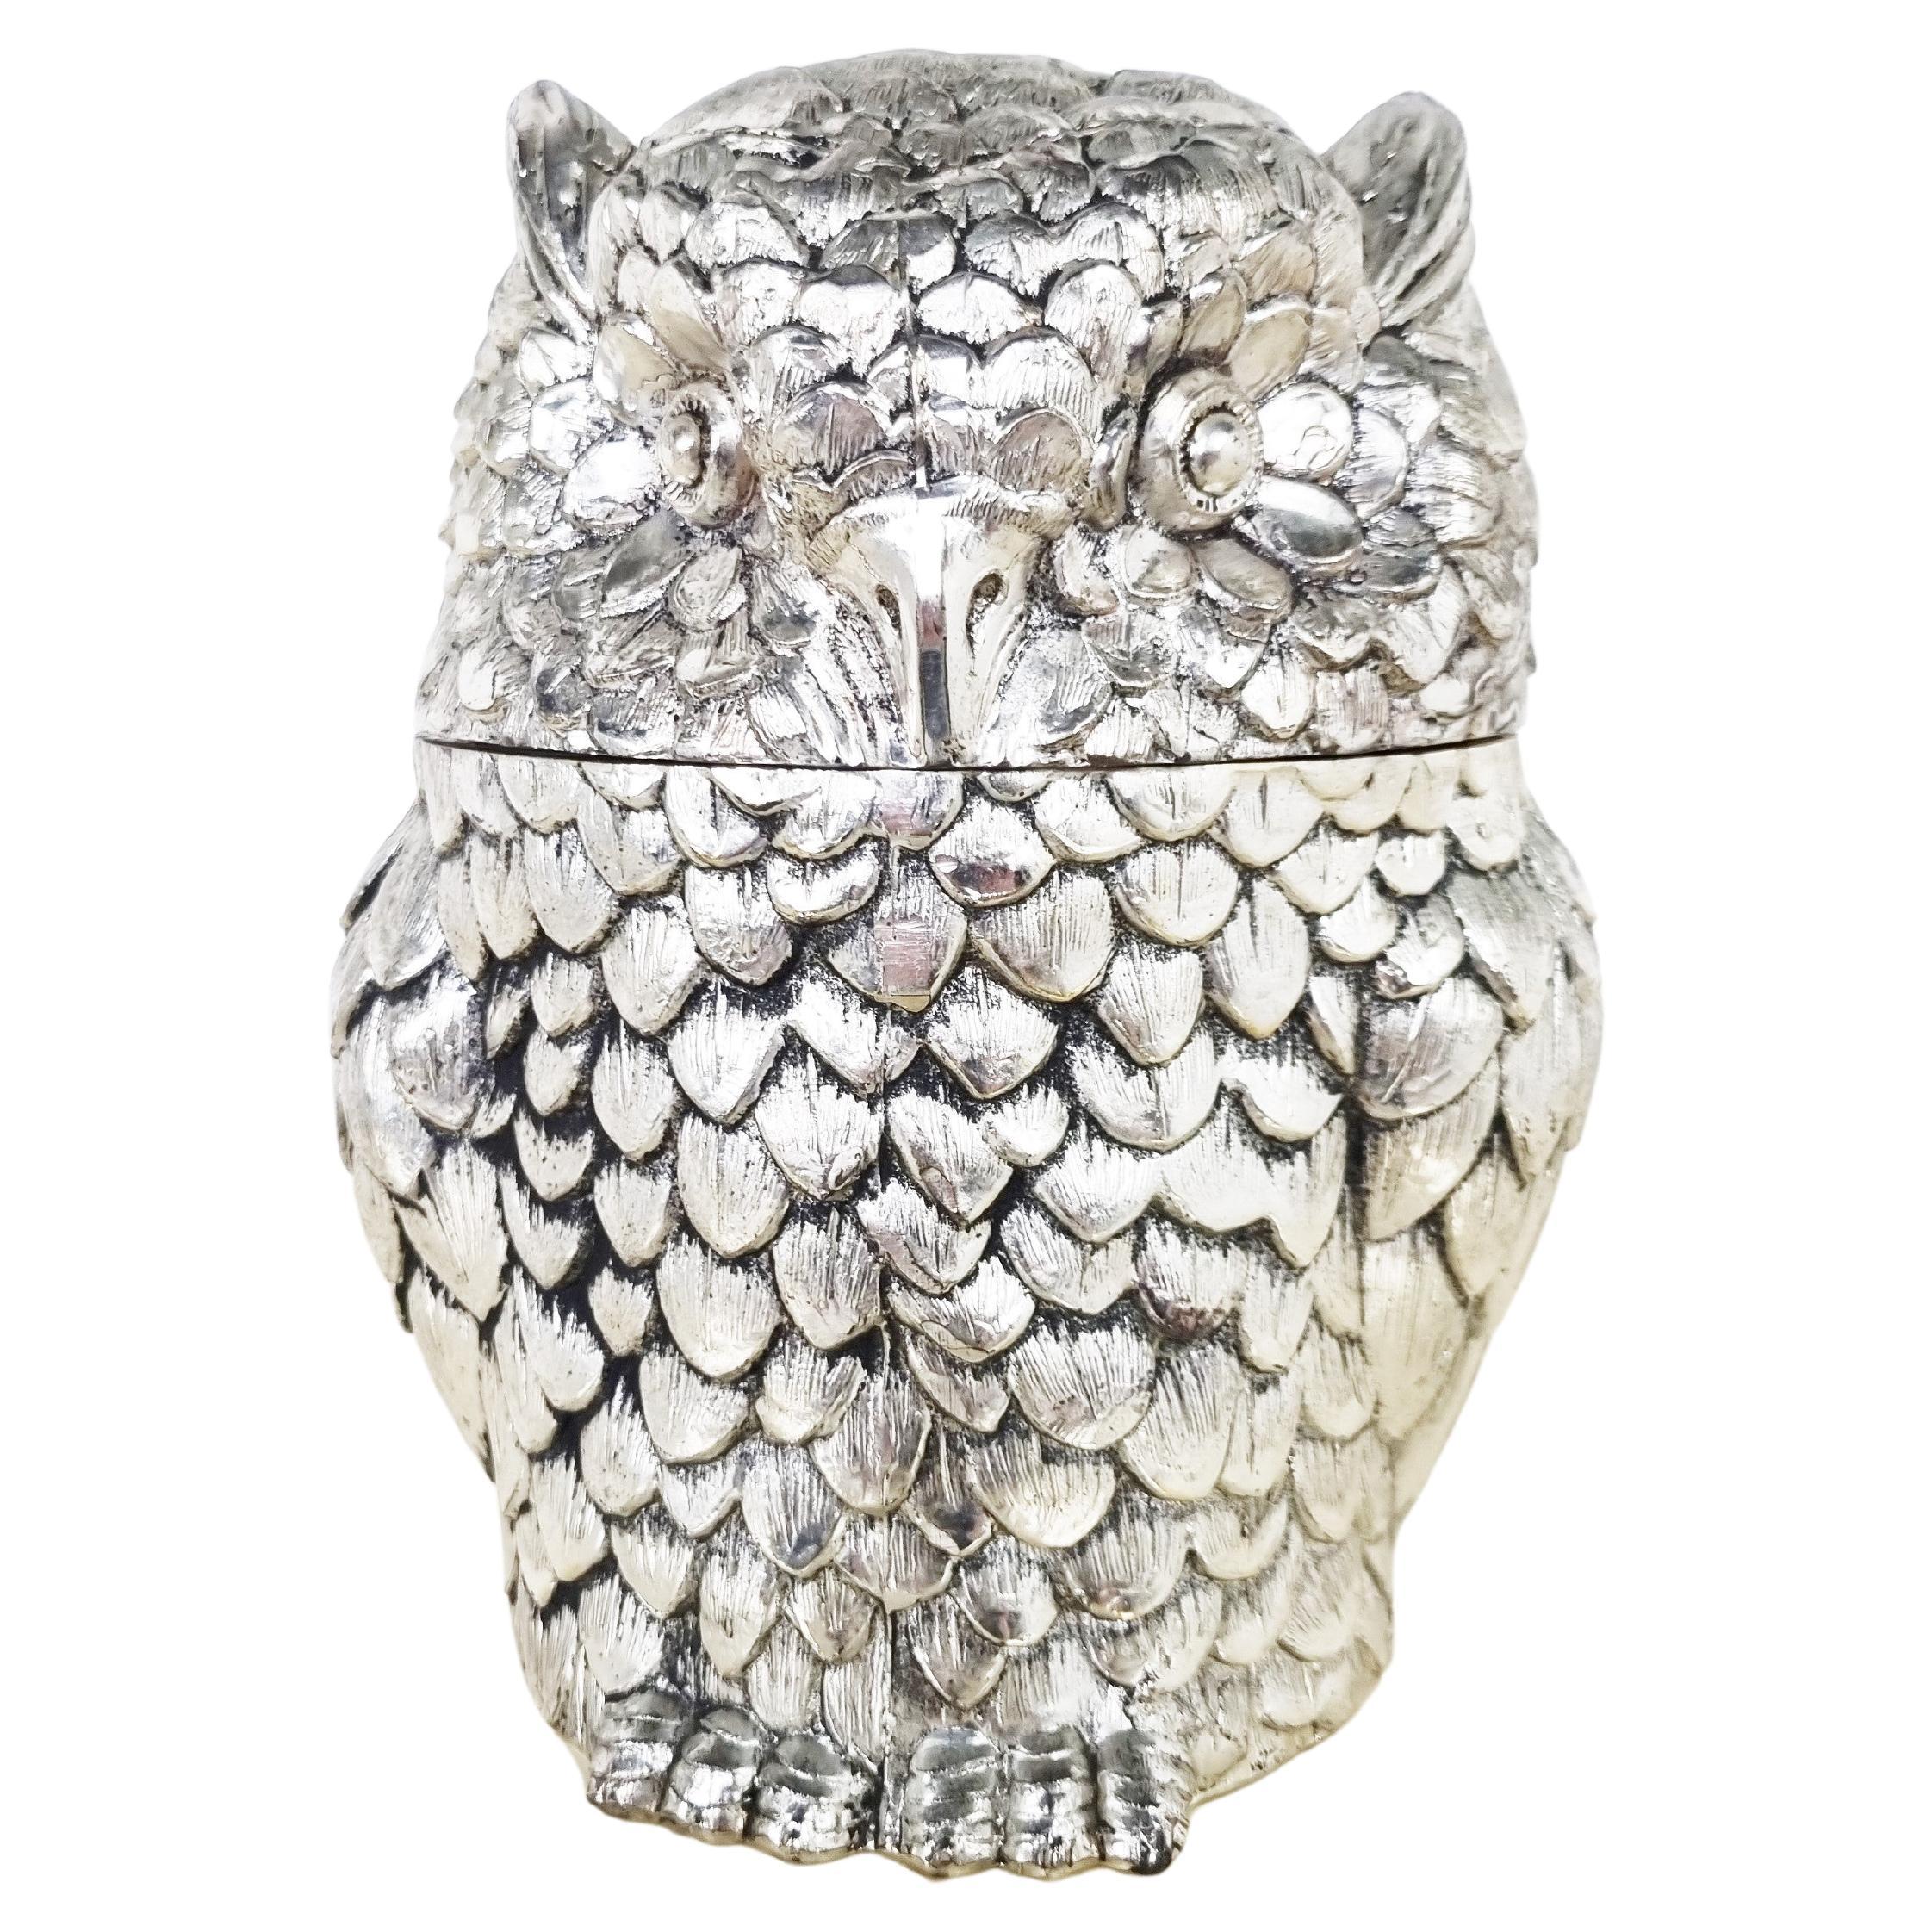 Owl ice bucket by Mauro Manetti, 1960s